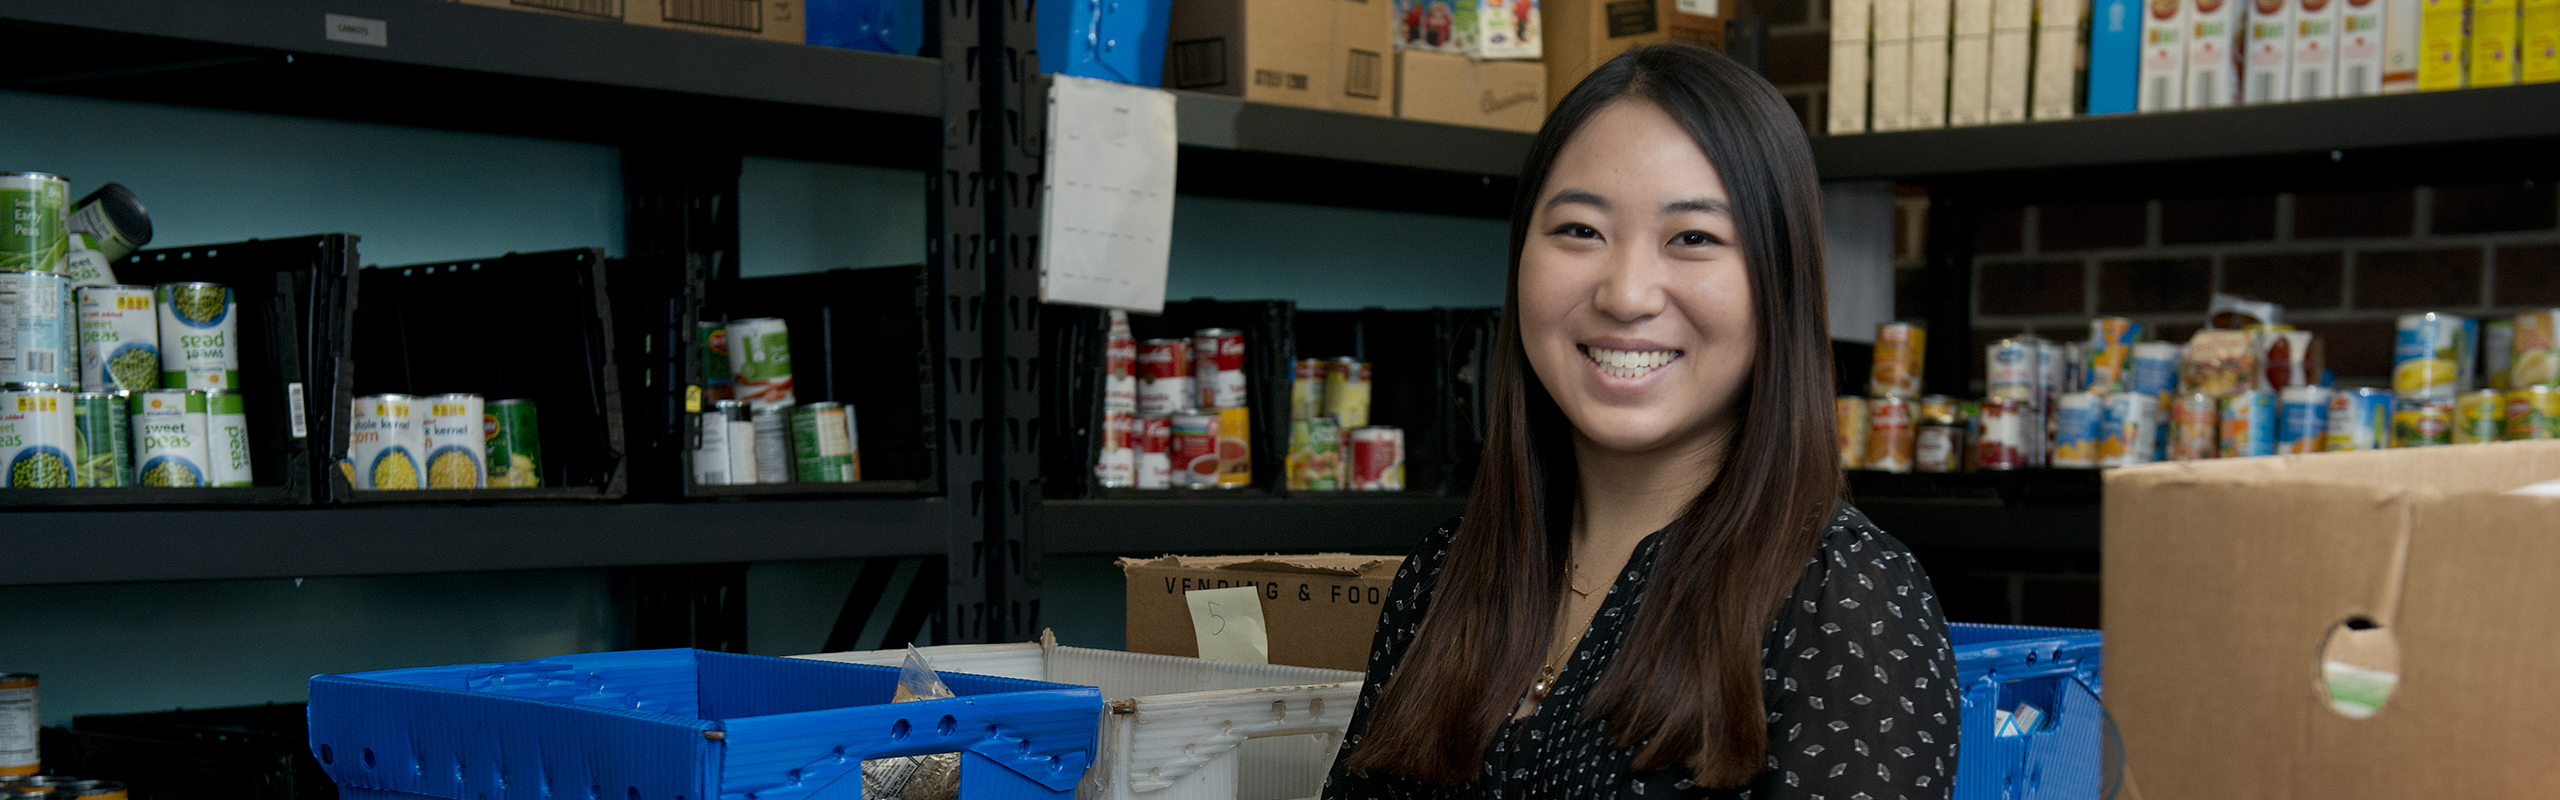 Jenny Fukunaga '17 volunteers at Allied Churches of Alamance County. Here she poses in ACAC's food pantry.